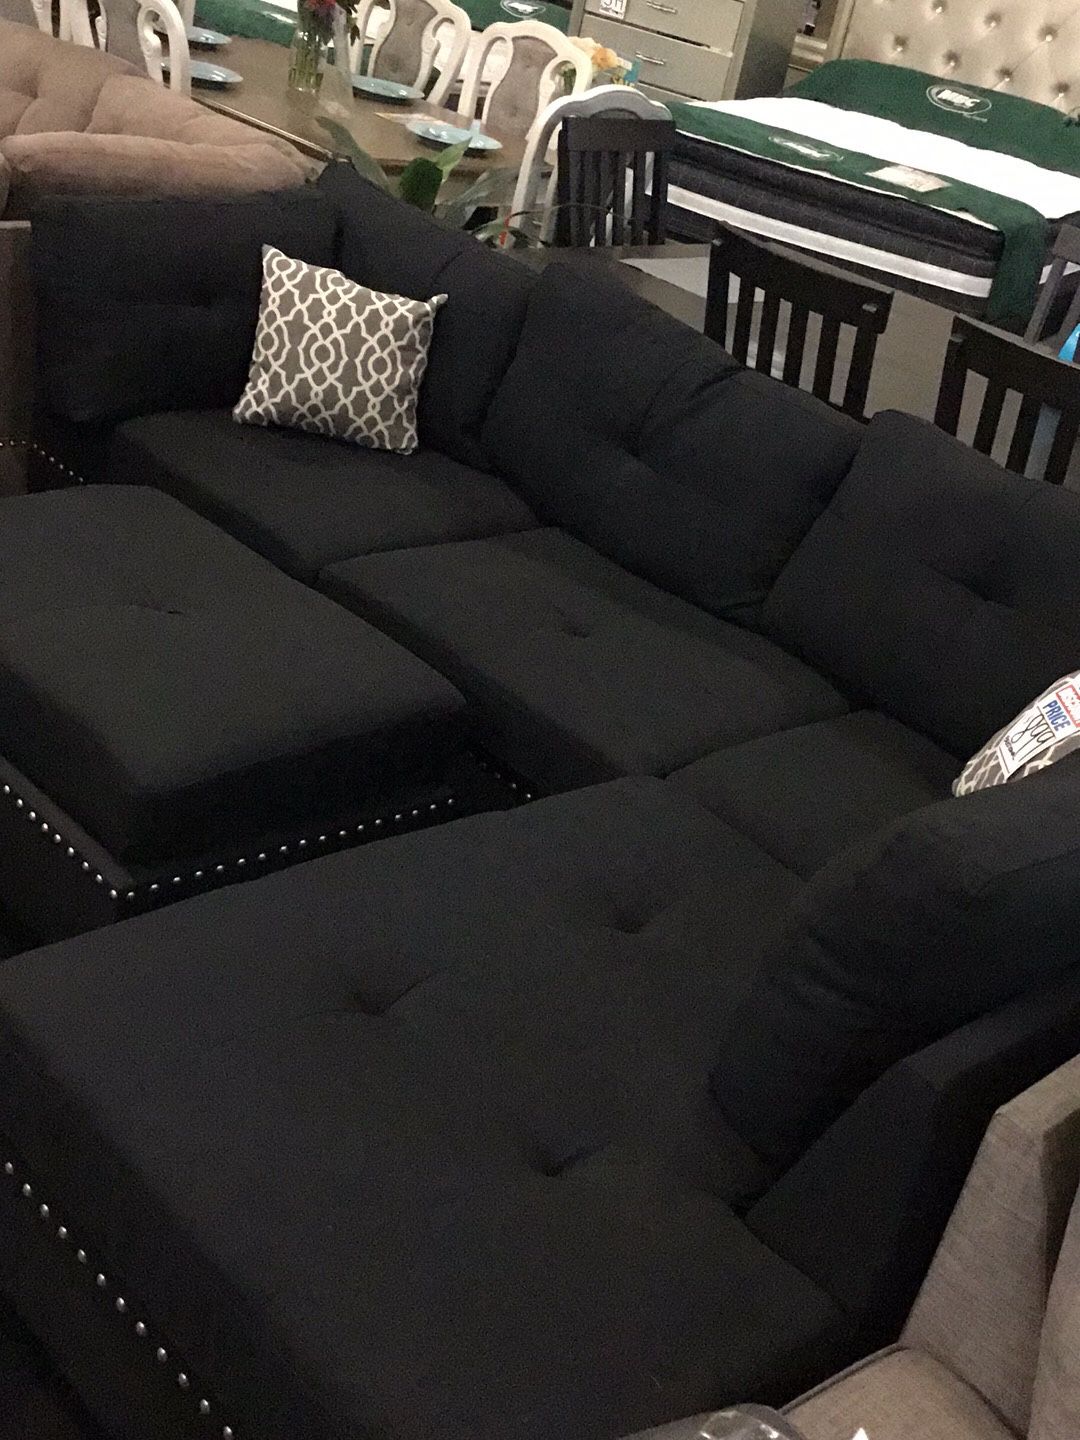 Sectional With Ottoman Included $599.99